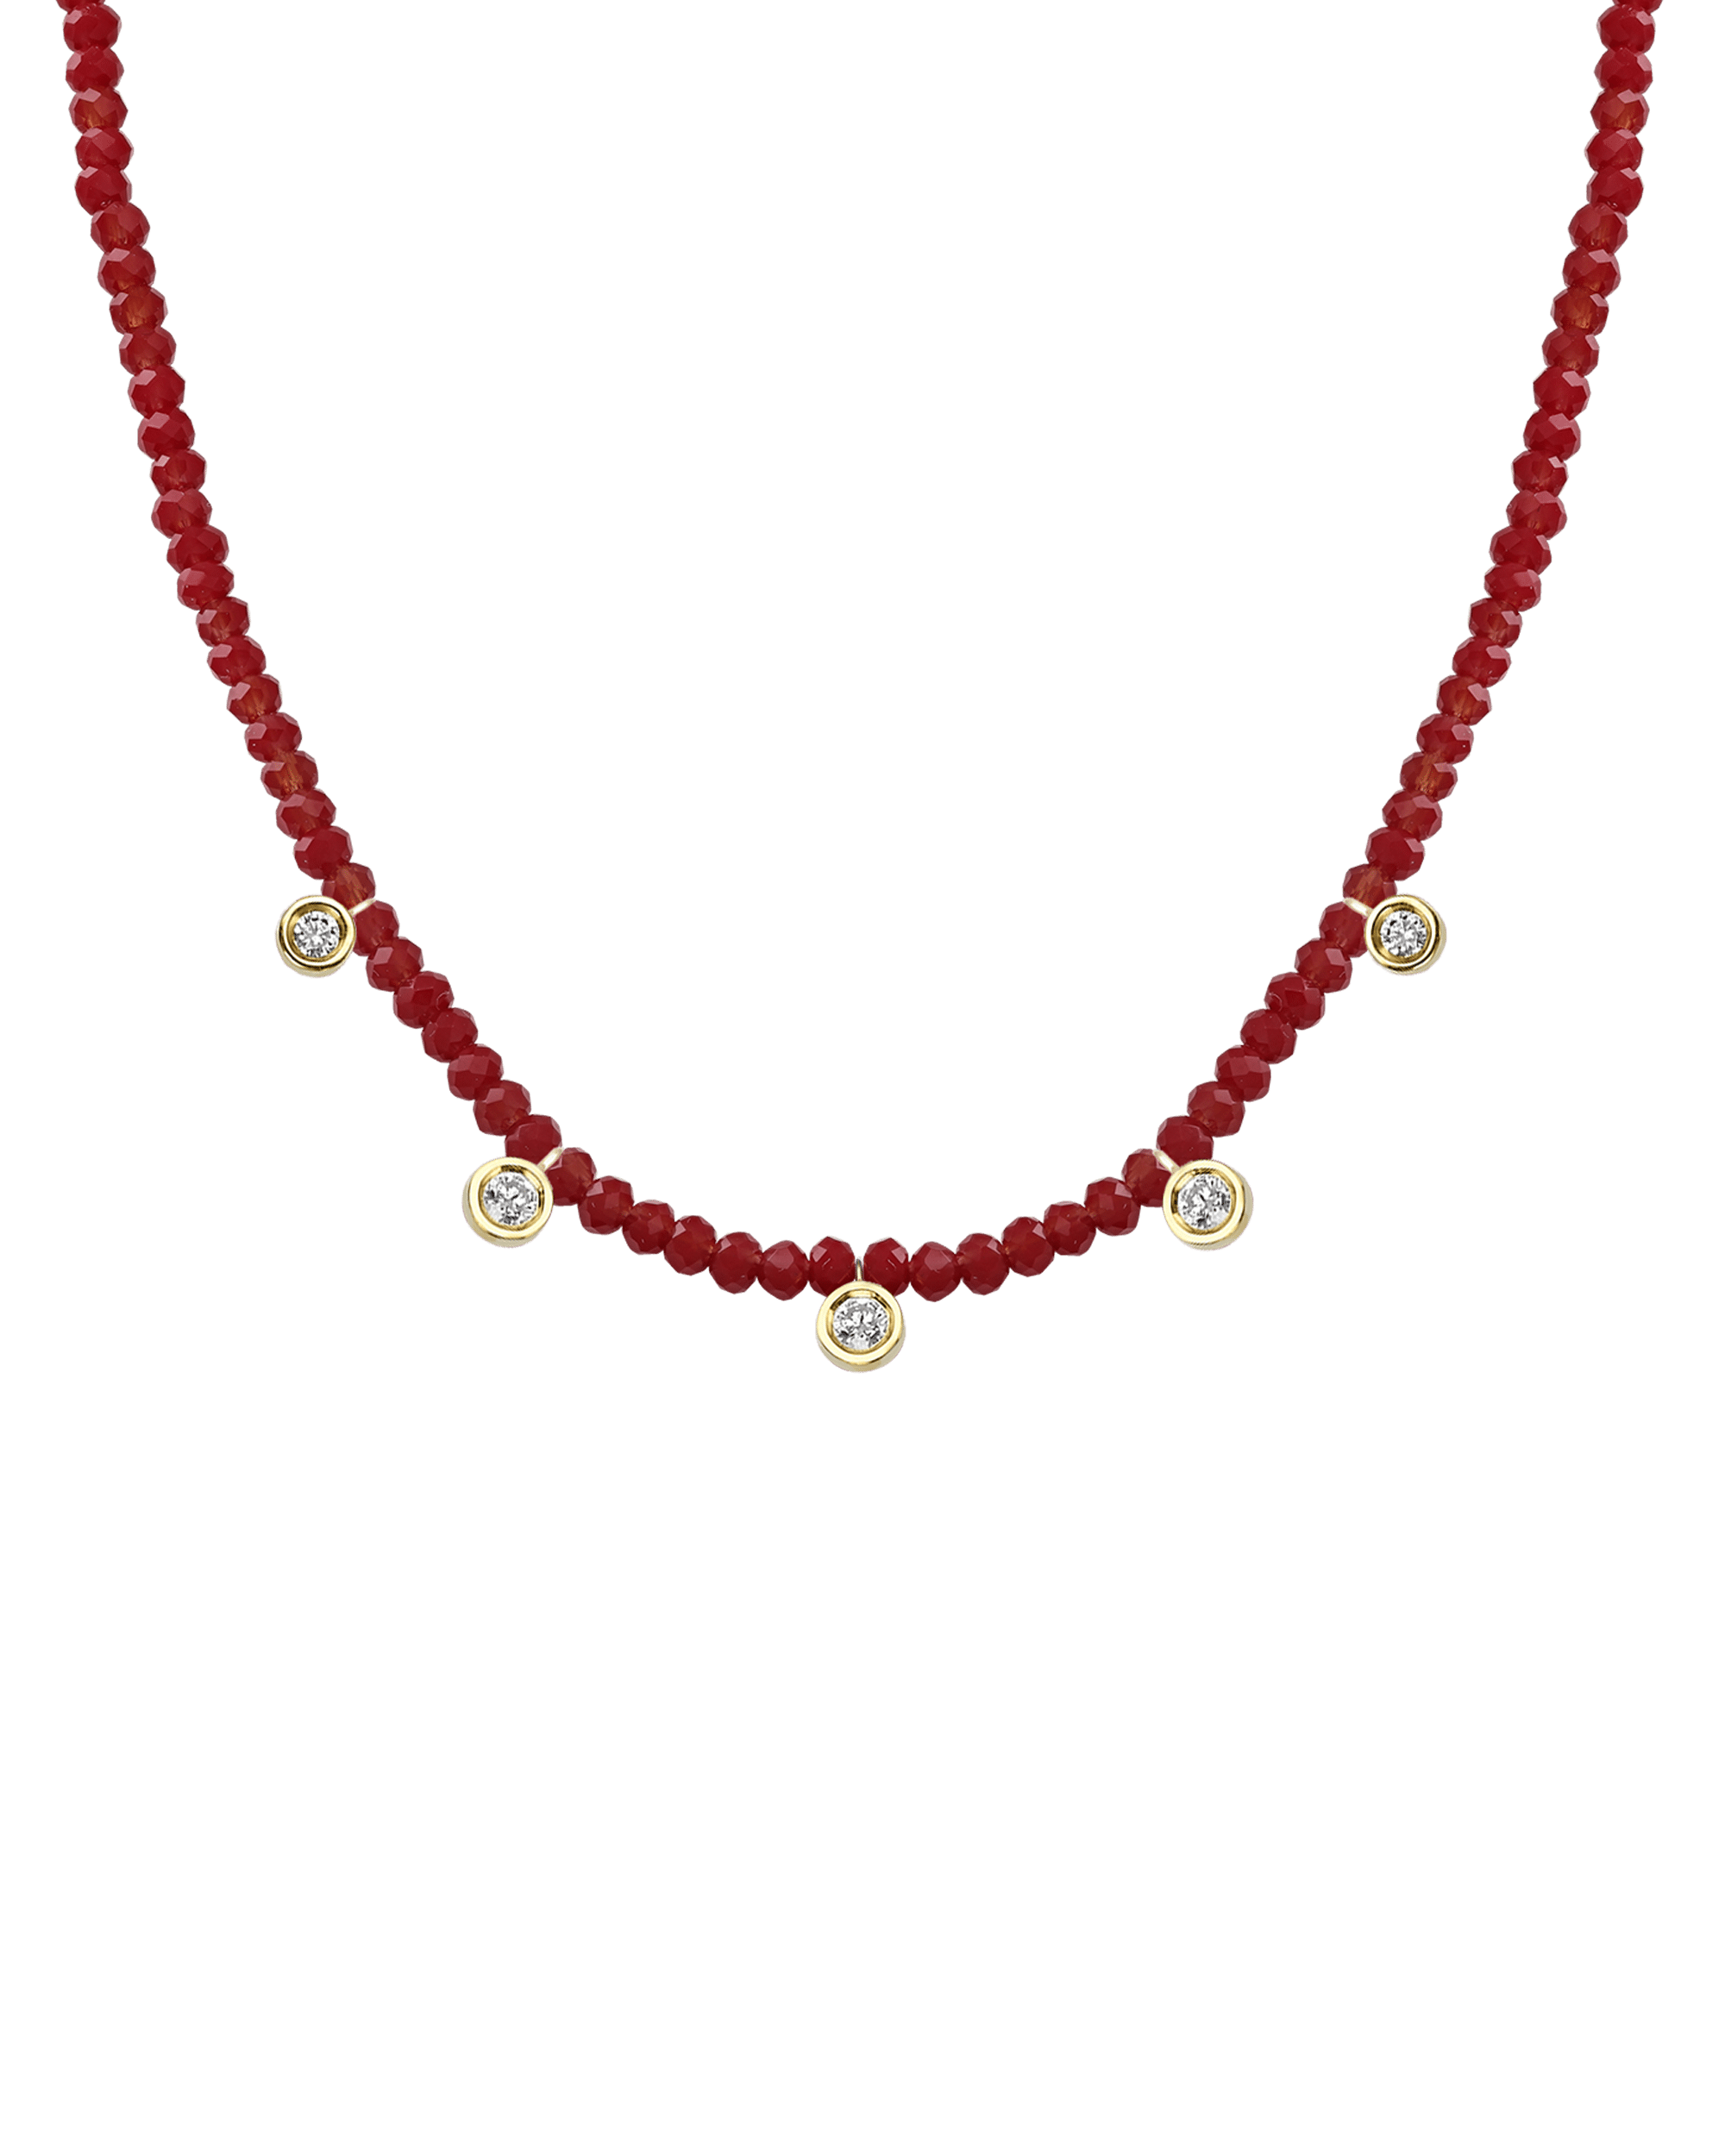 Emerald Gemstone & Five diamonds Necklace - 14K Yellow Gold Necklaces magal-dev Natural Red Jade 14" - Collar 